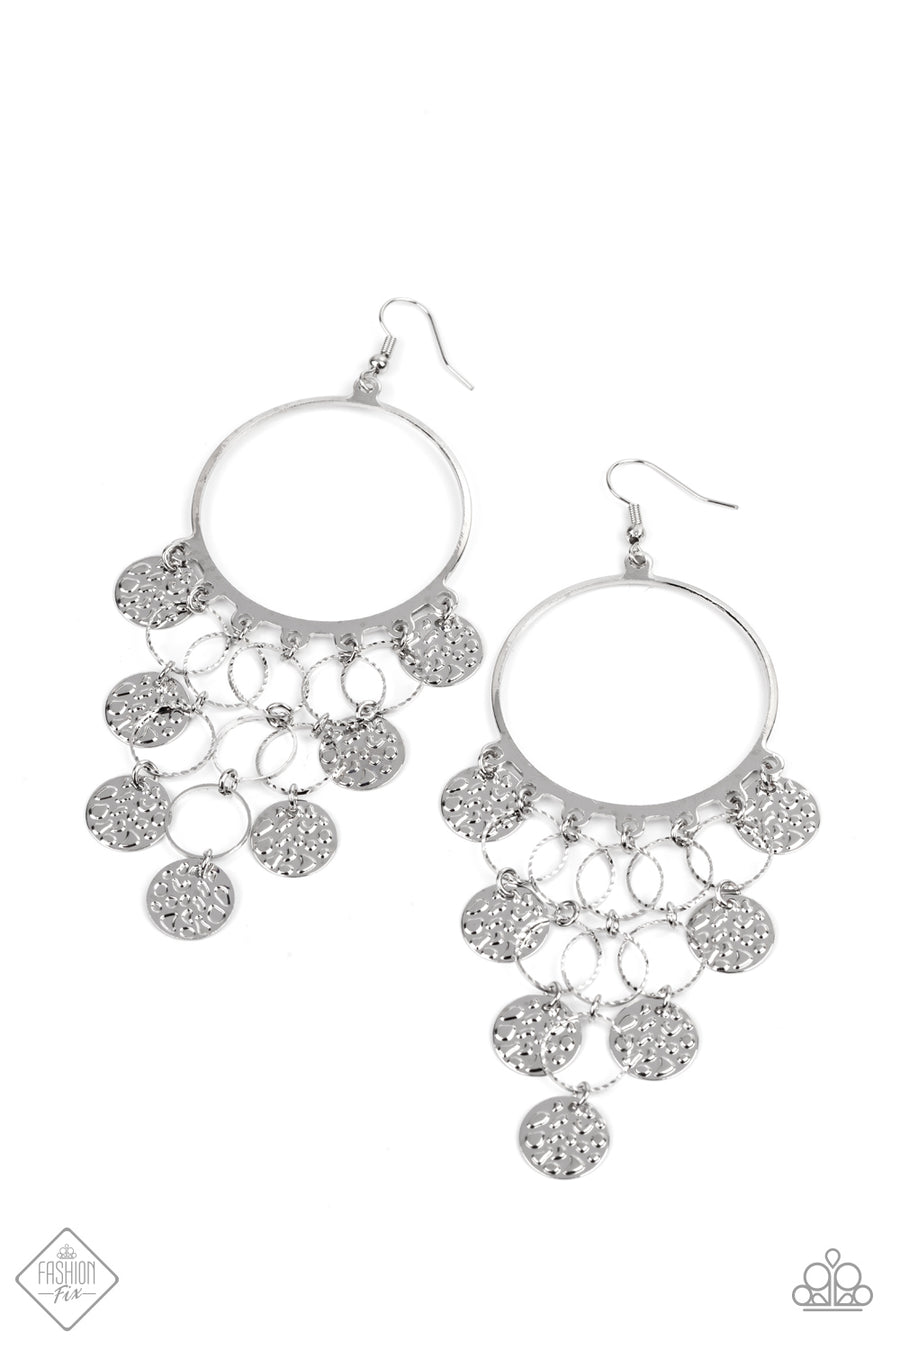 All CHIME High - Silver Hammered Earrings- Paparrazi Accessories